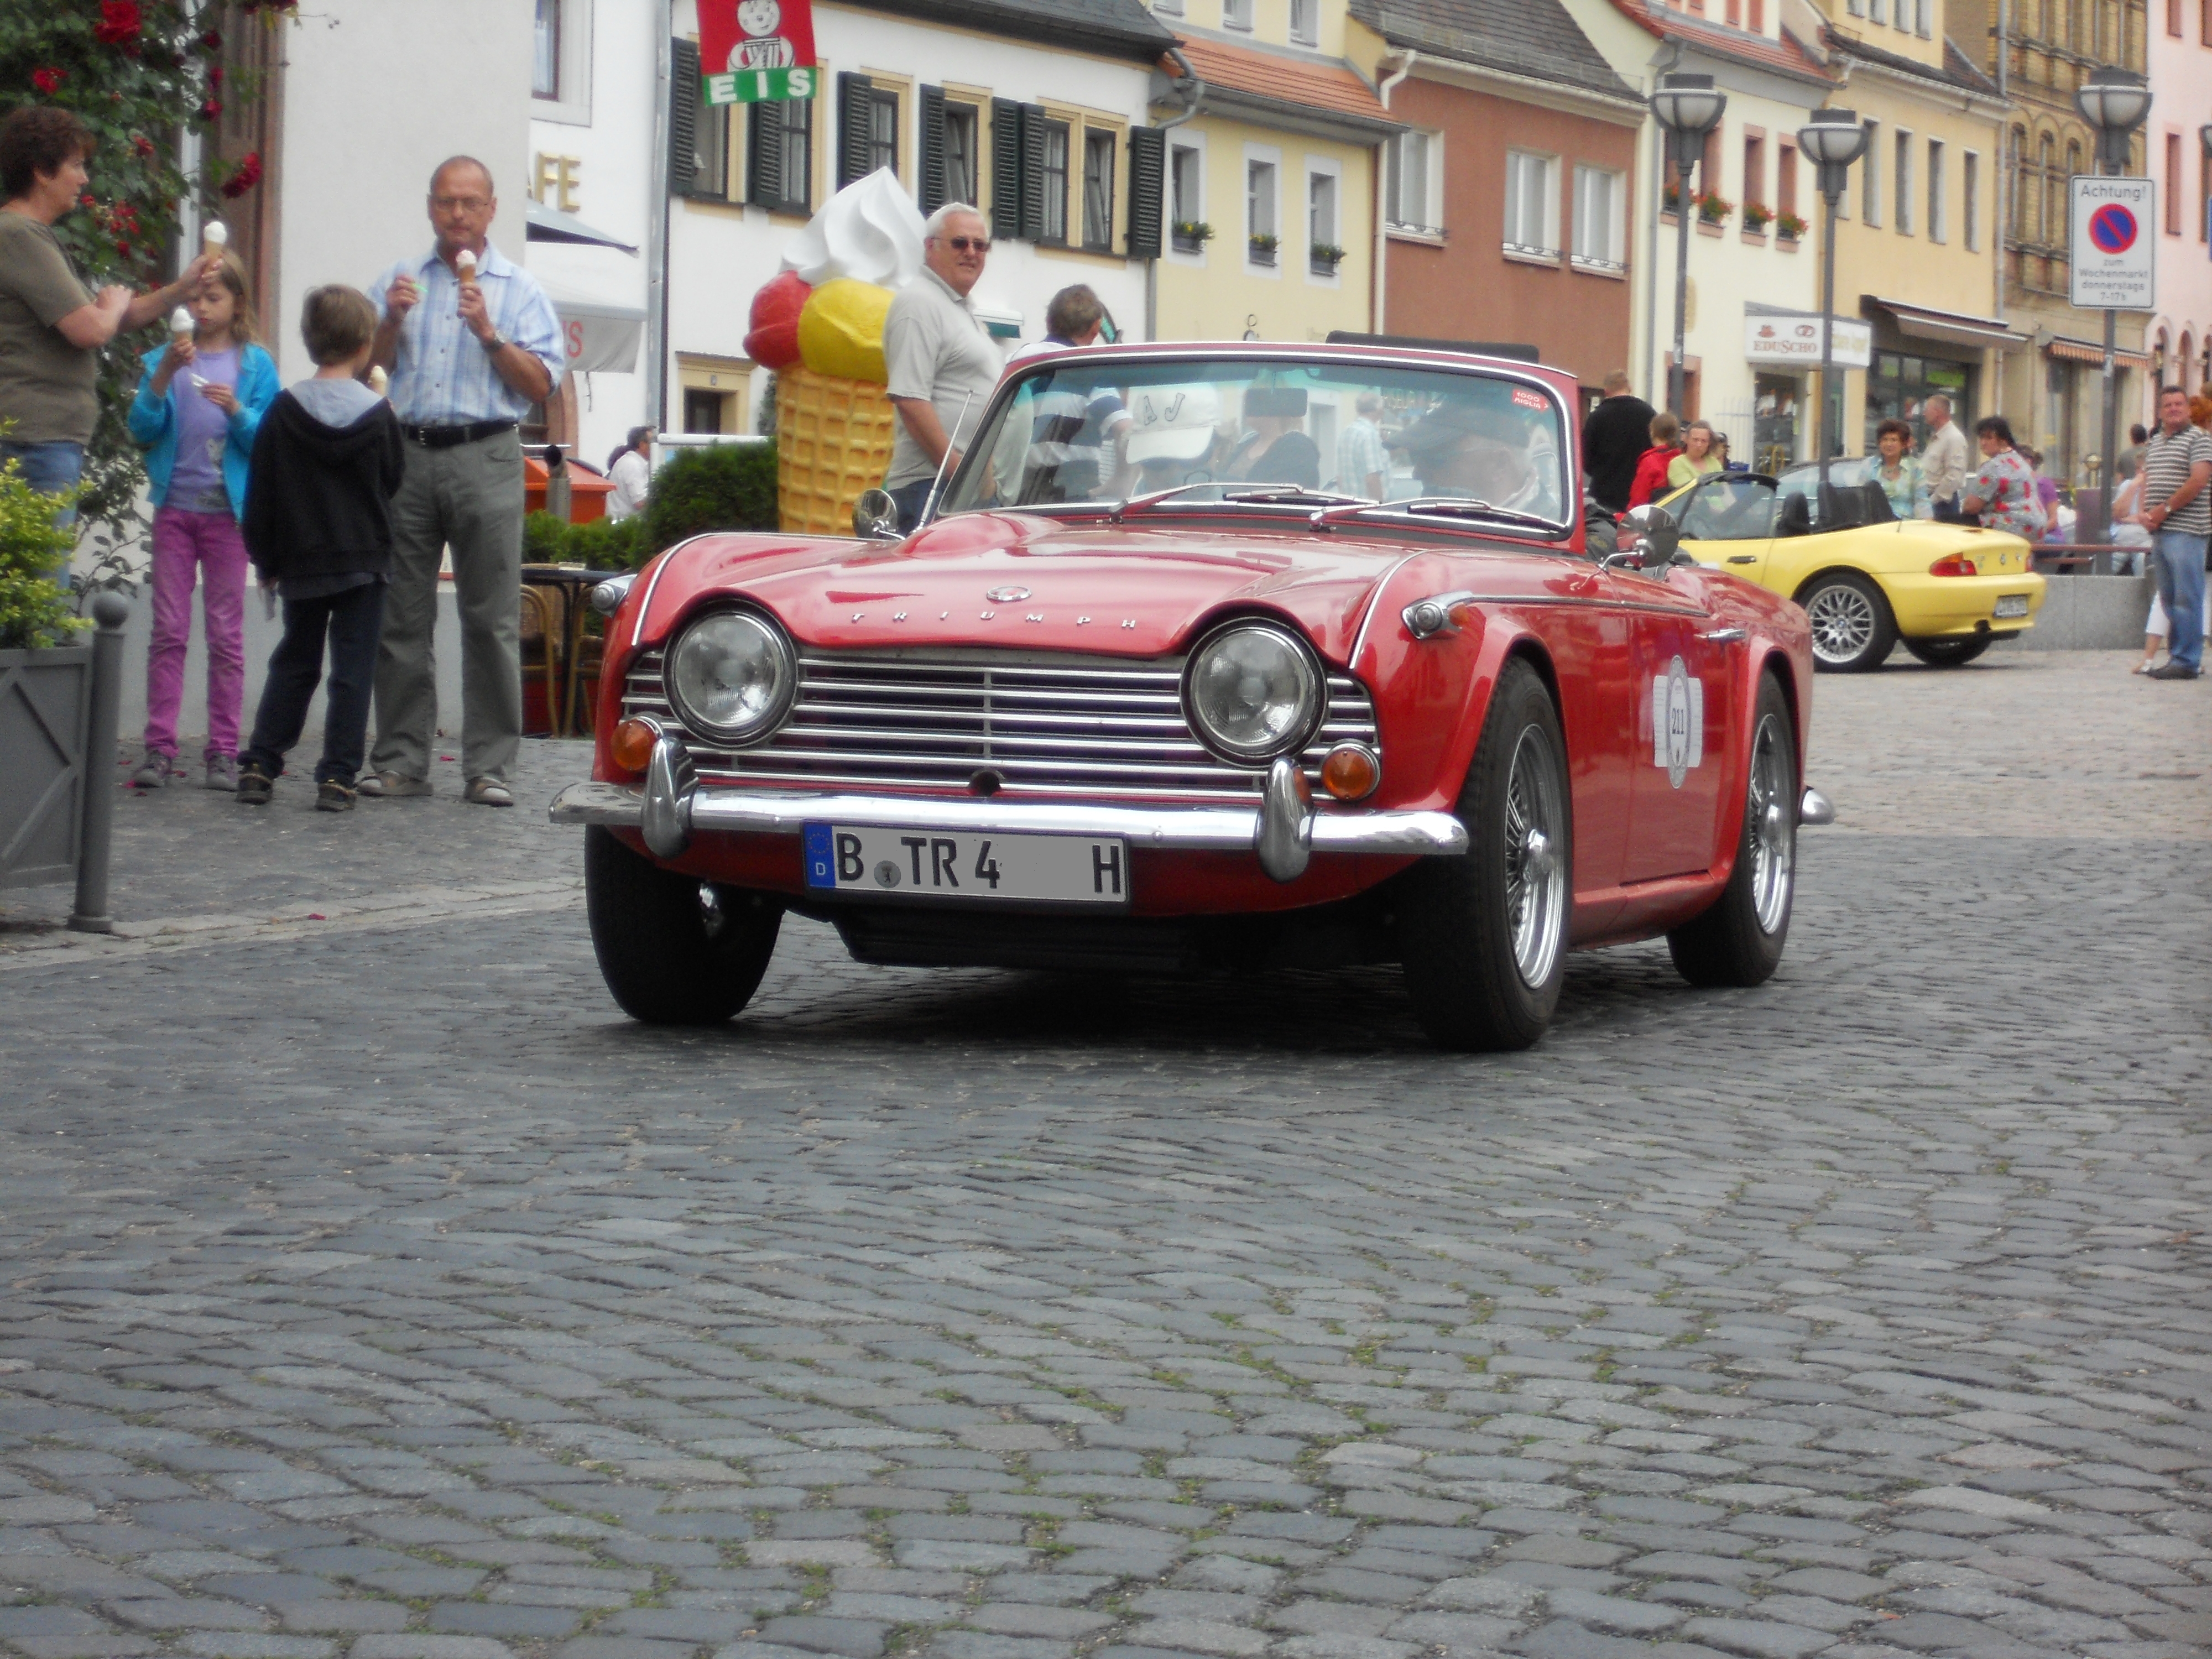 Triumph TR 4A IRS (1965) | Flickr - Photo Sharing!